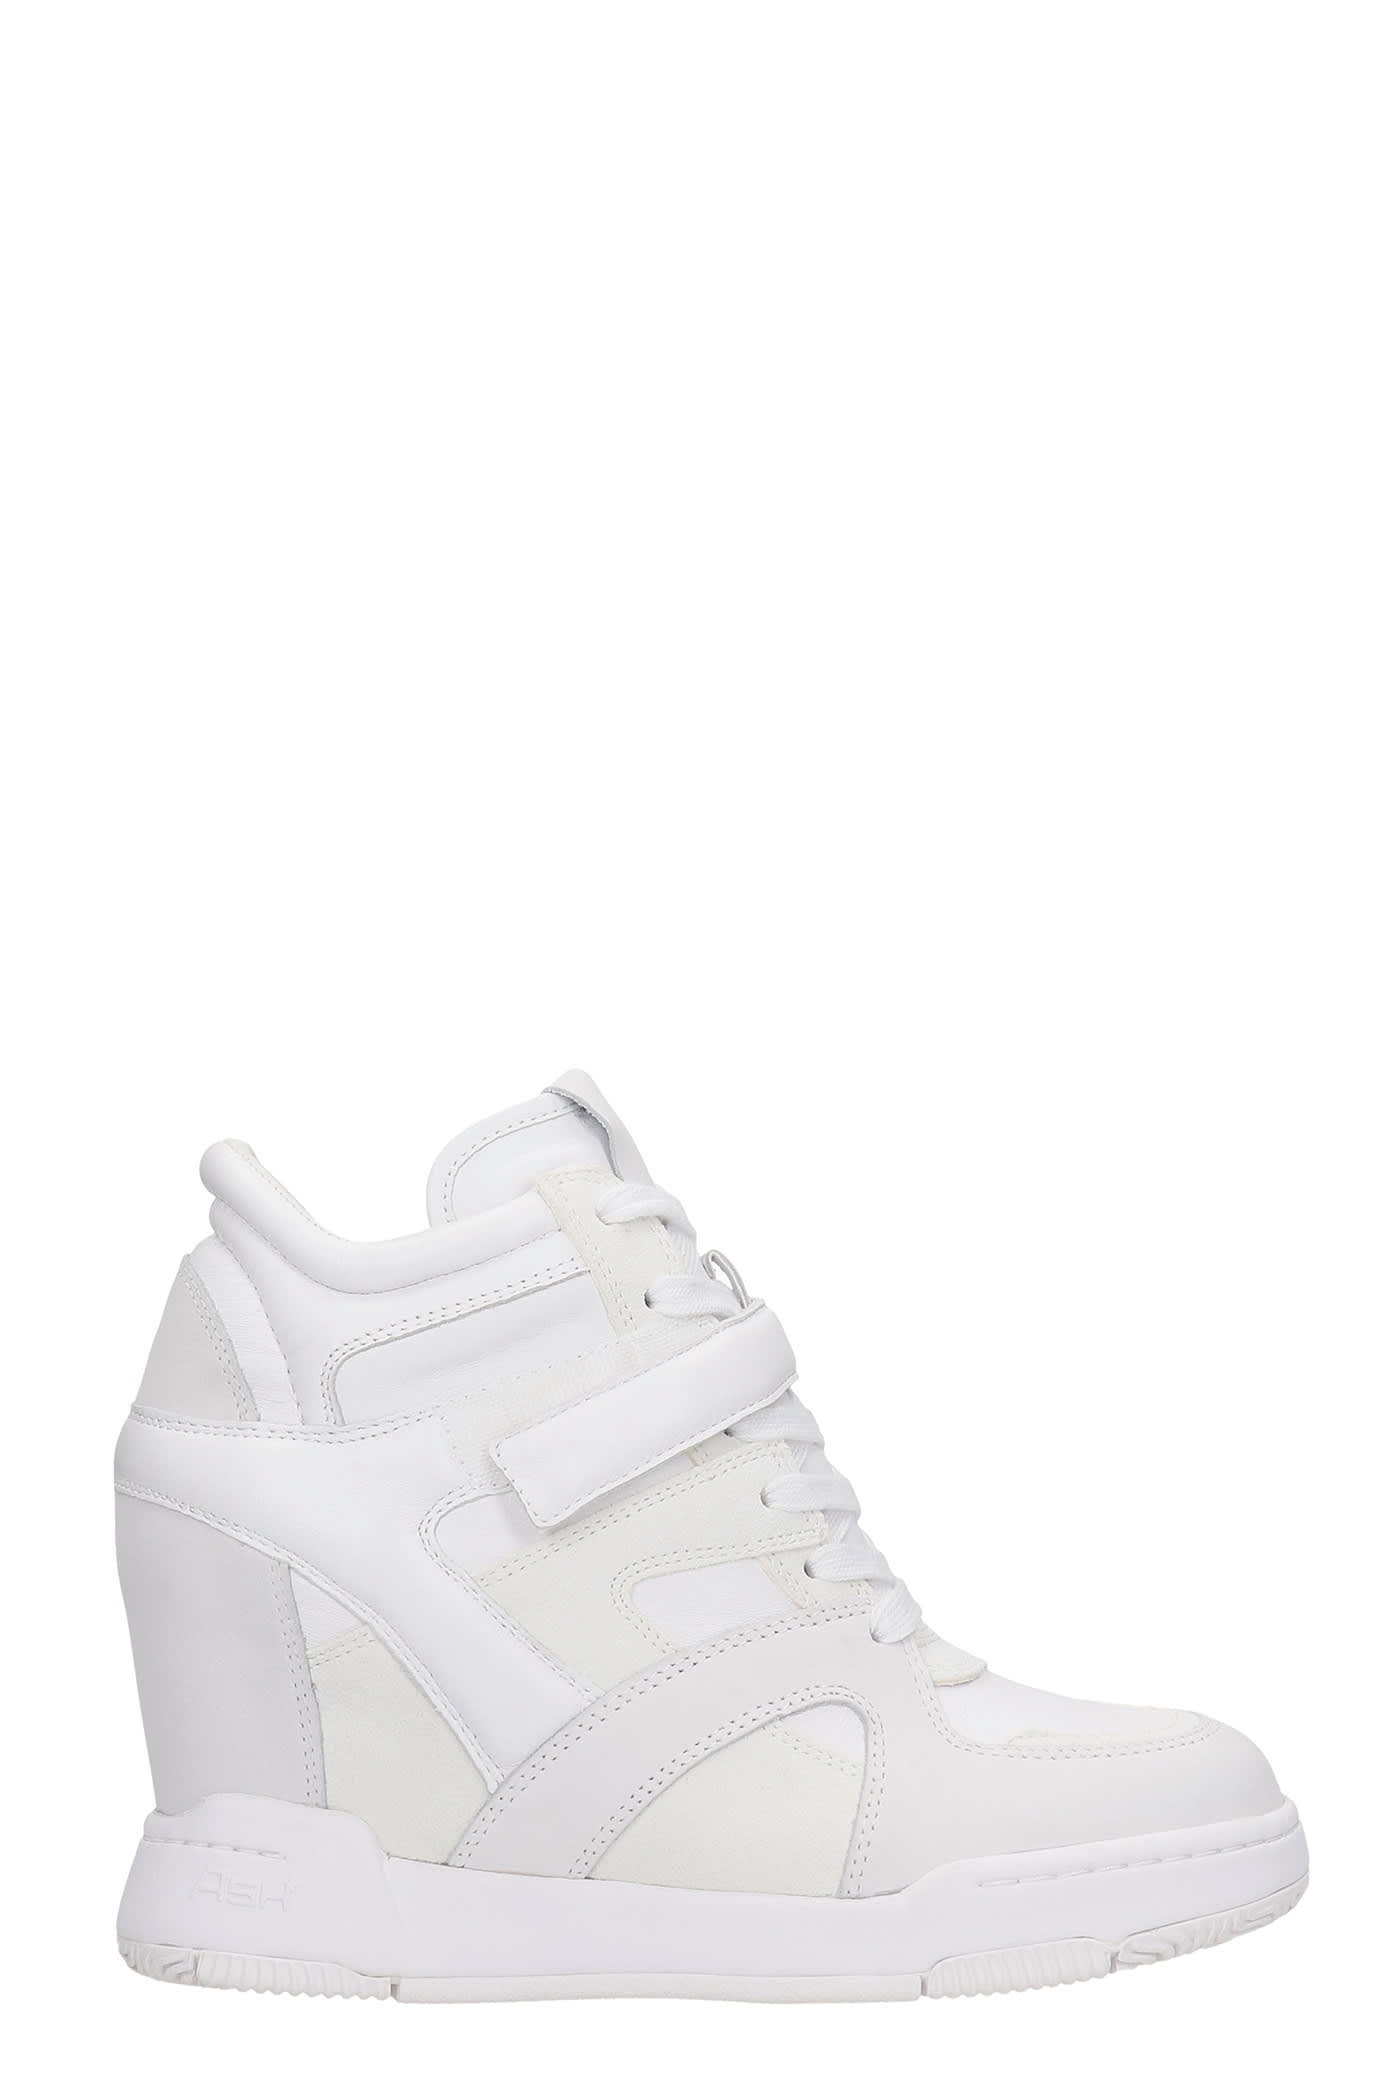 Ash Body 03 Sneakers In White Suede And Leather